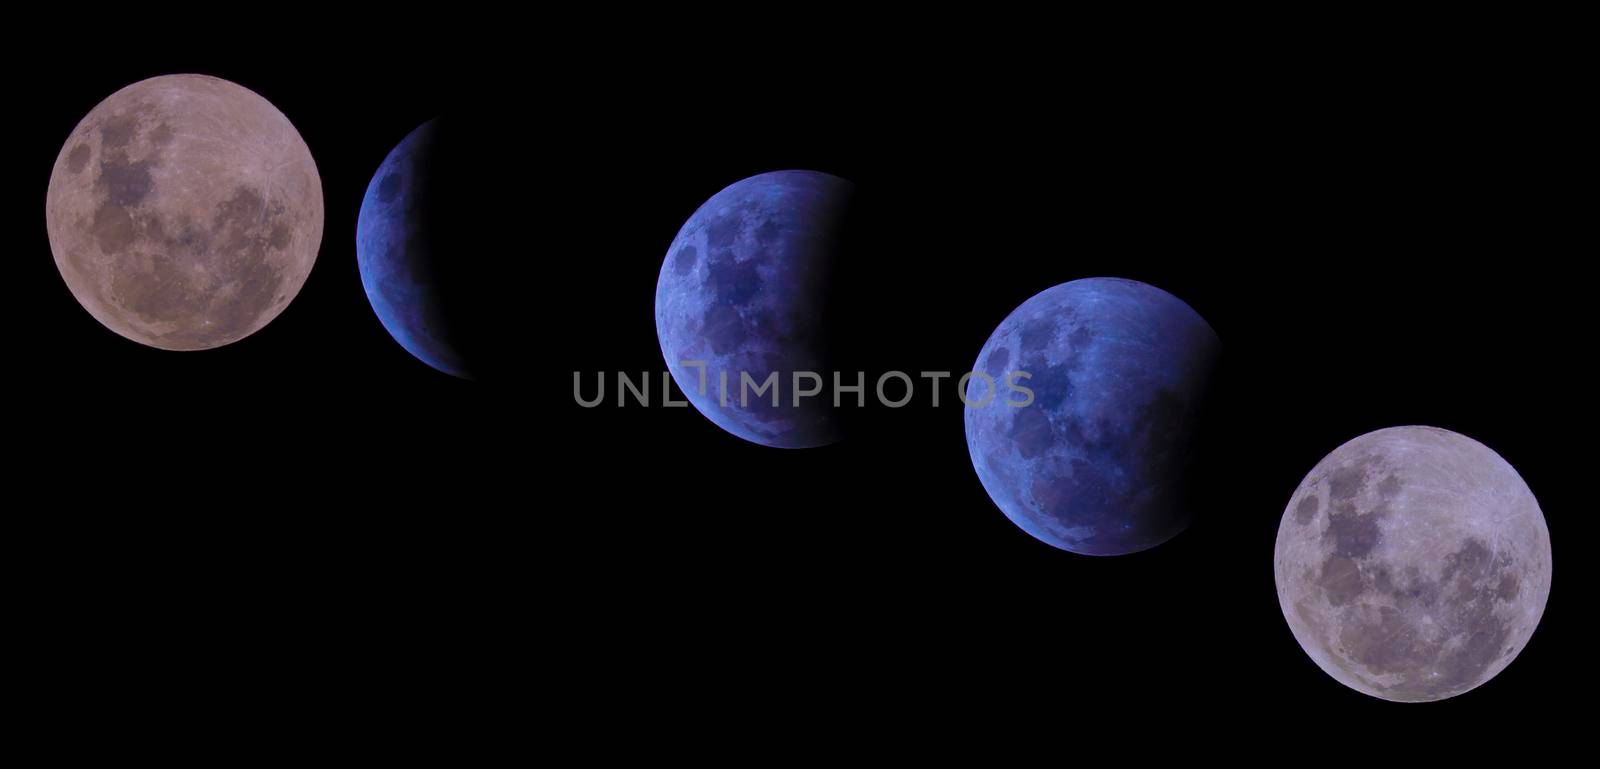 Photograph of a total lunar eclipse from the east coast of Australia by WittkePhotos